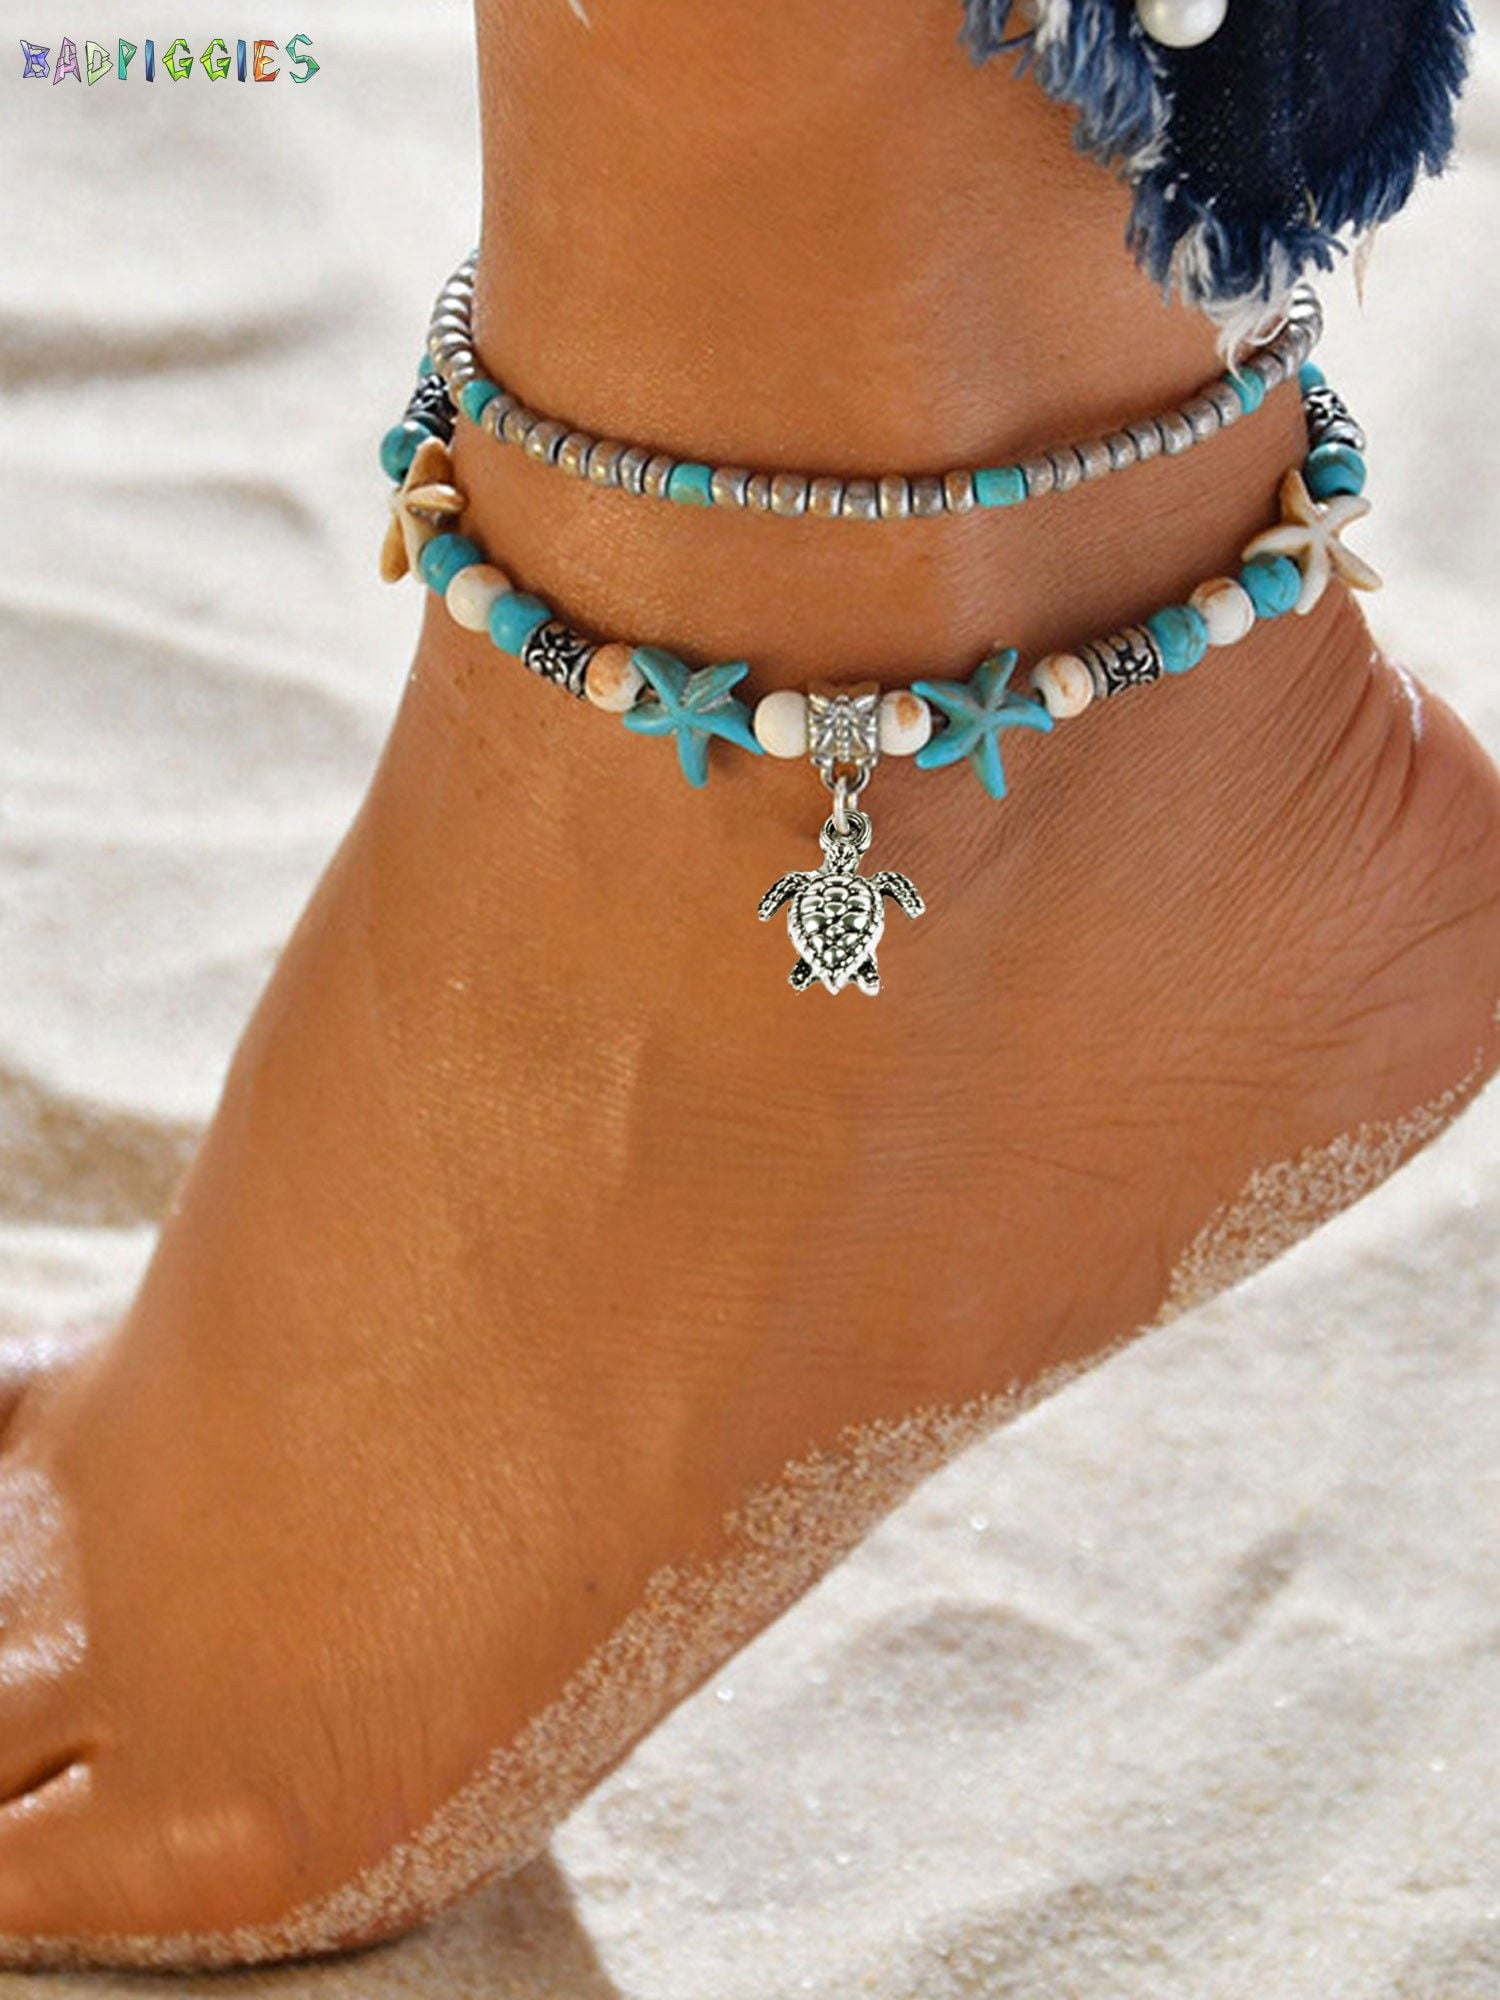 Boho Gold Silver Anklet Star Foot Ankle Bracelet Beach Jewelry Sandal Chain New